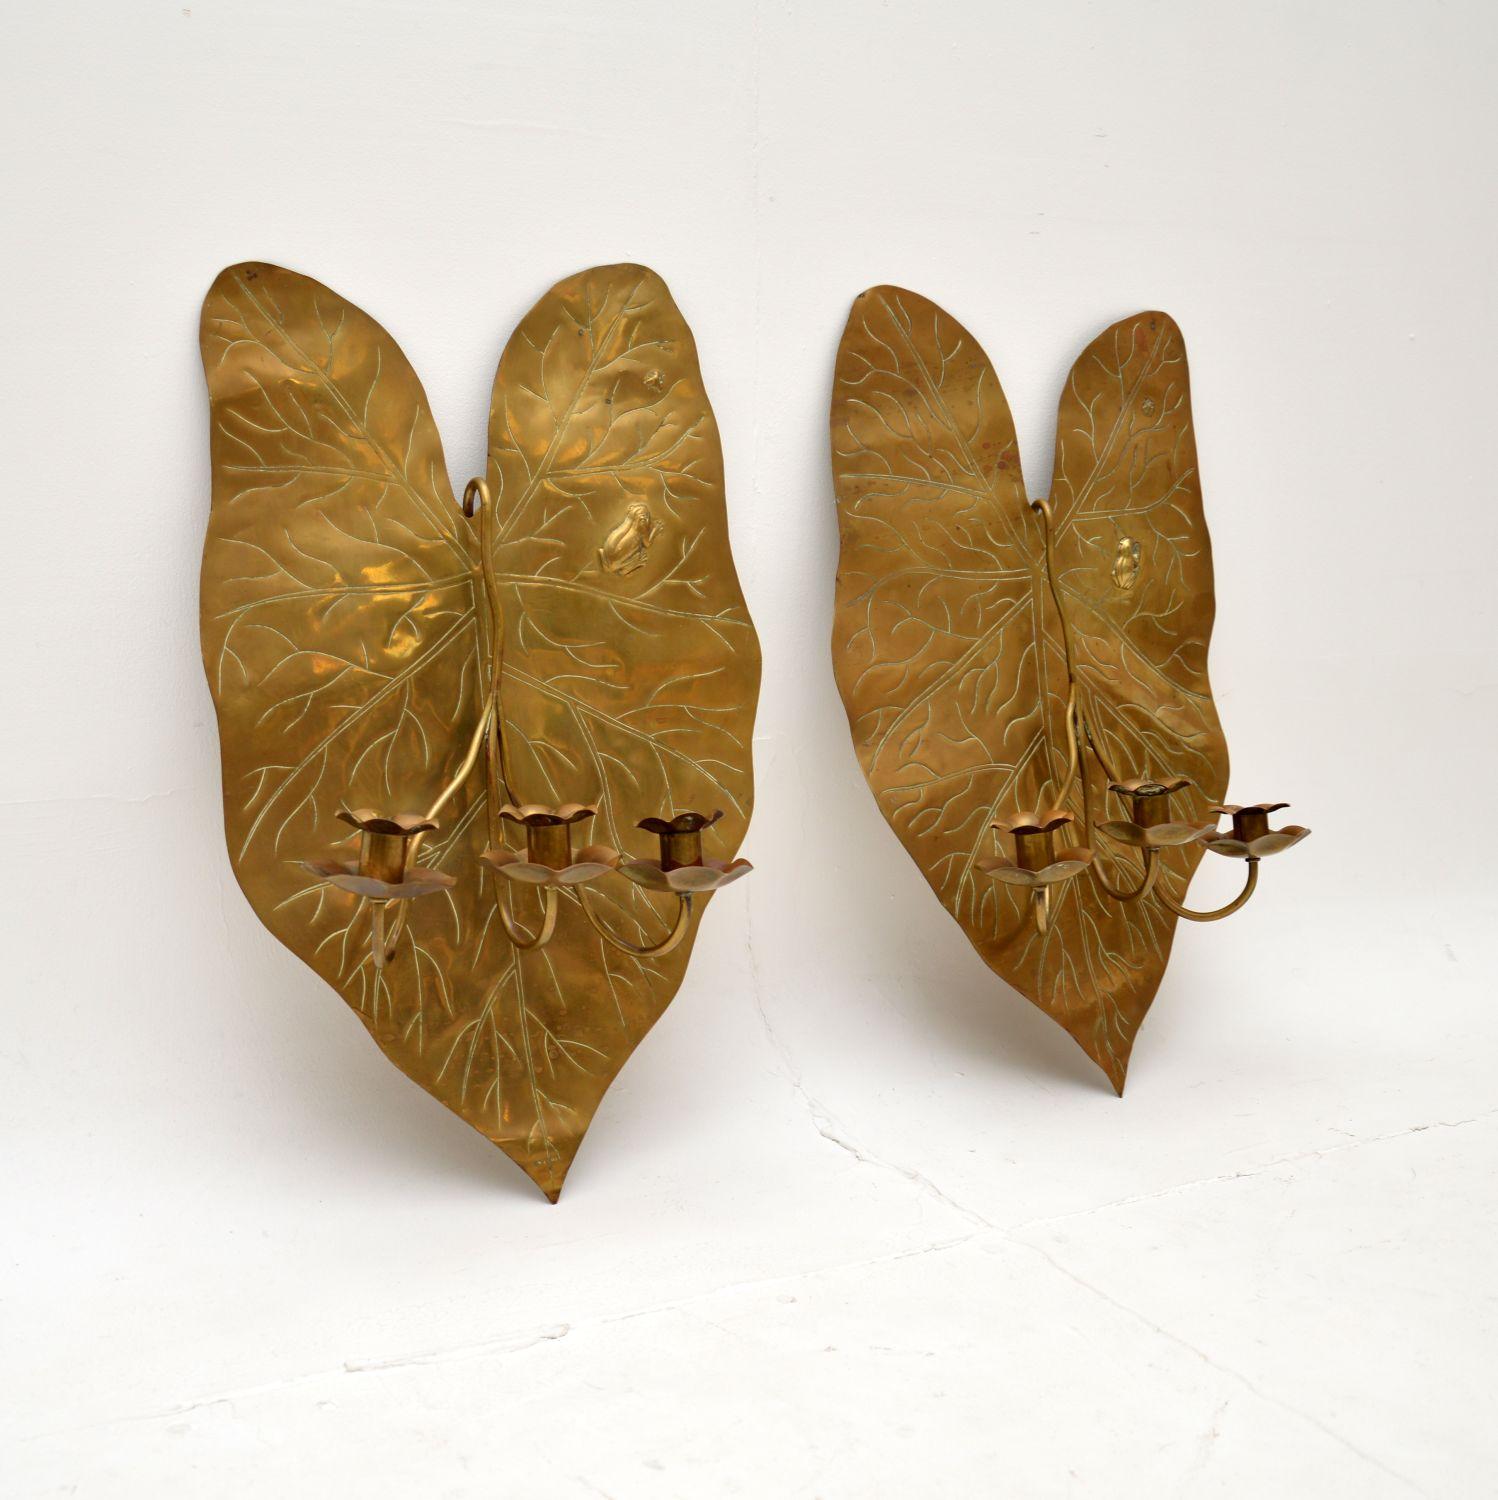 A stunning and quite unusual pair of antique Art Nouveau brass wall mounting candelabra. They were made in England, and they date from around the 1890-1900 period.

They depict large water lily leaves, each has a small frog in the top corner hunting